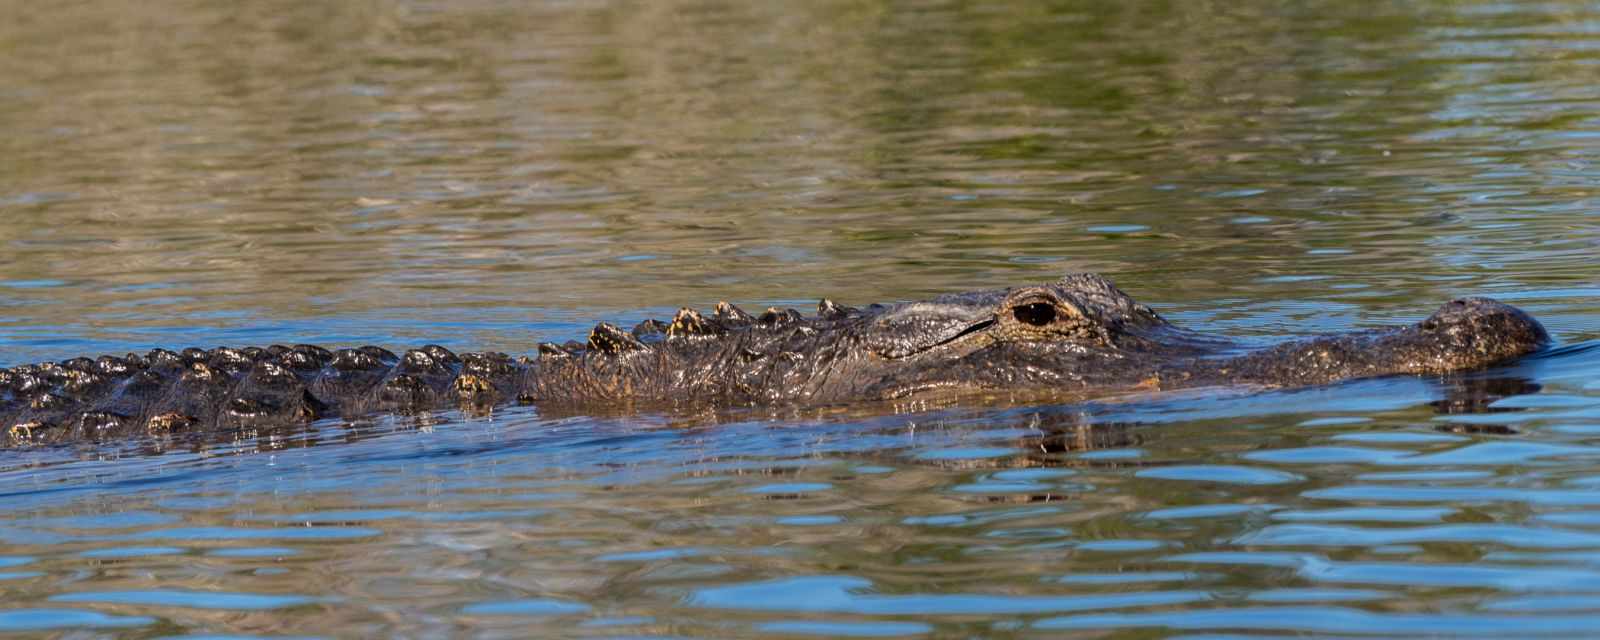  Everglades National Park in Florida - Best Time - 9 Things to Do